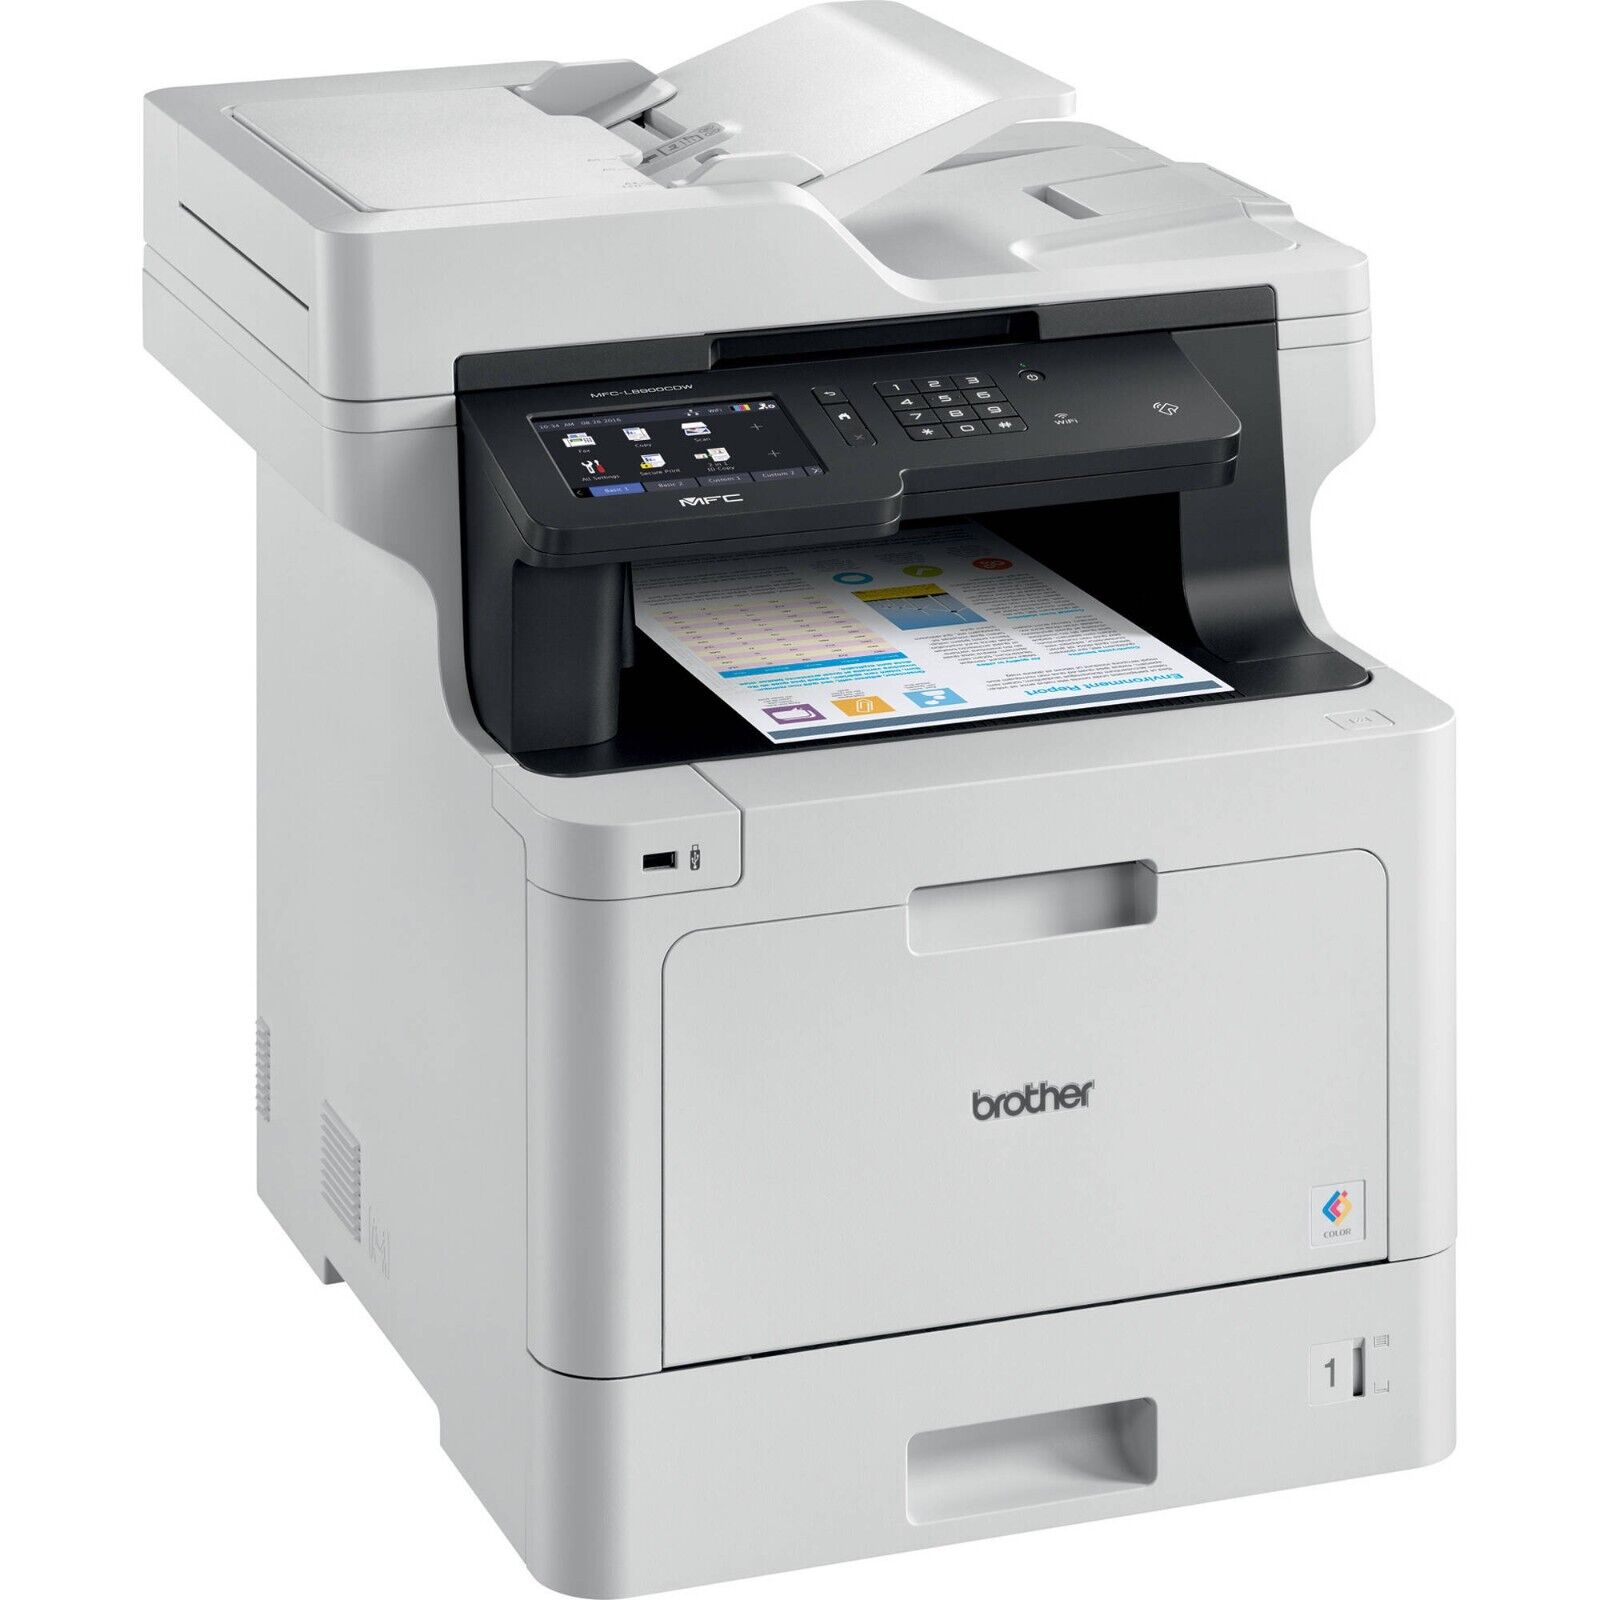 Brother - MFC-L8900CDW Wireless Color All-in-One Laser Printer - White